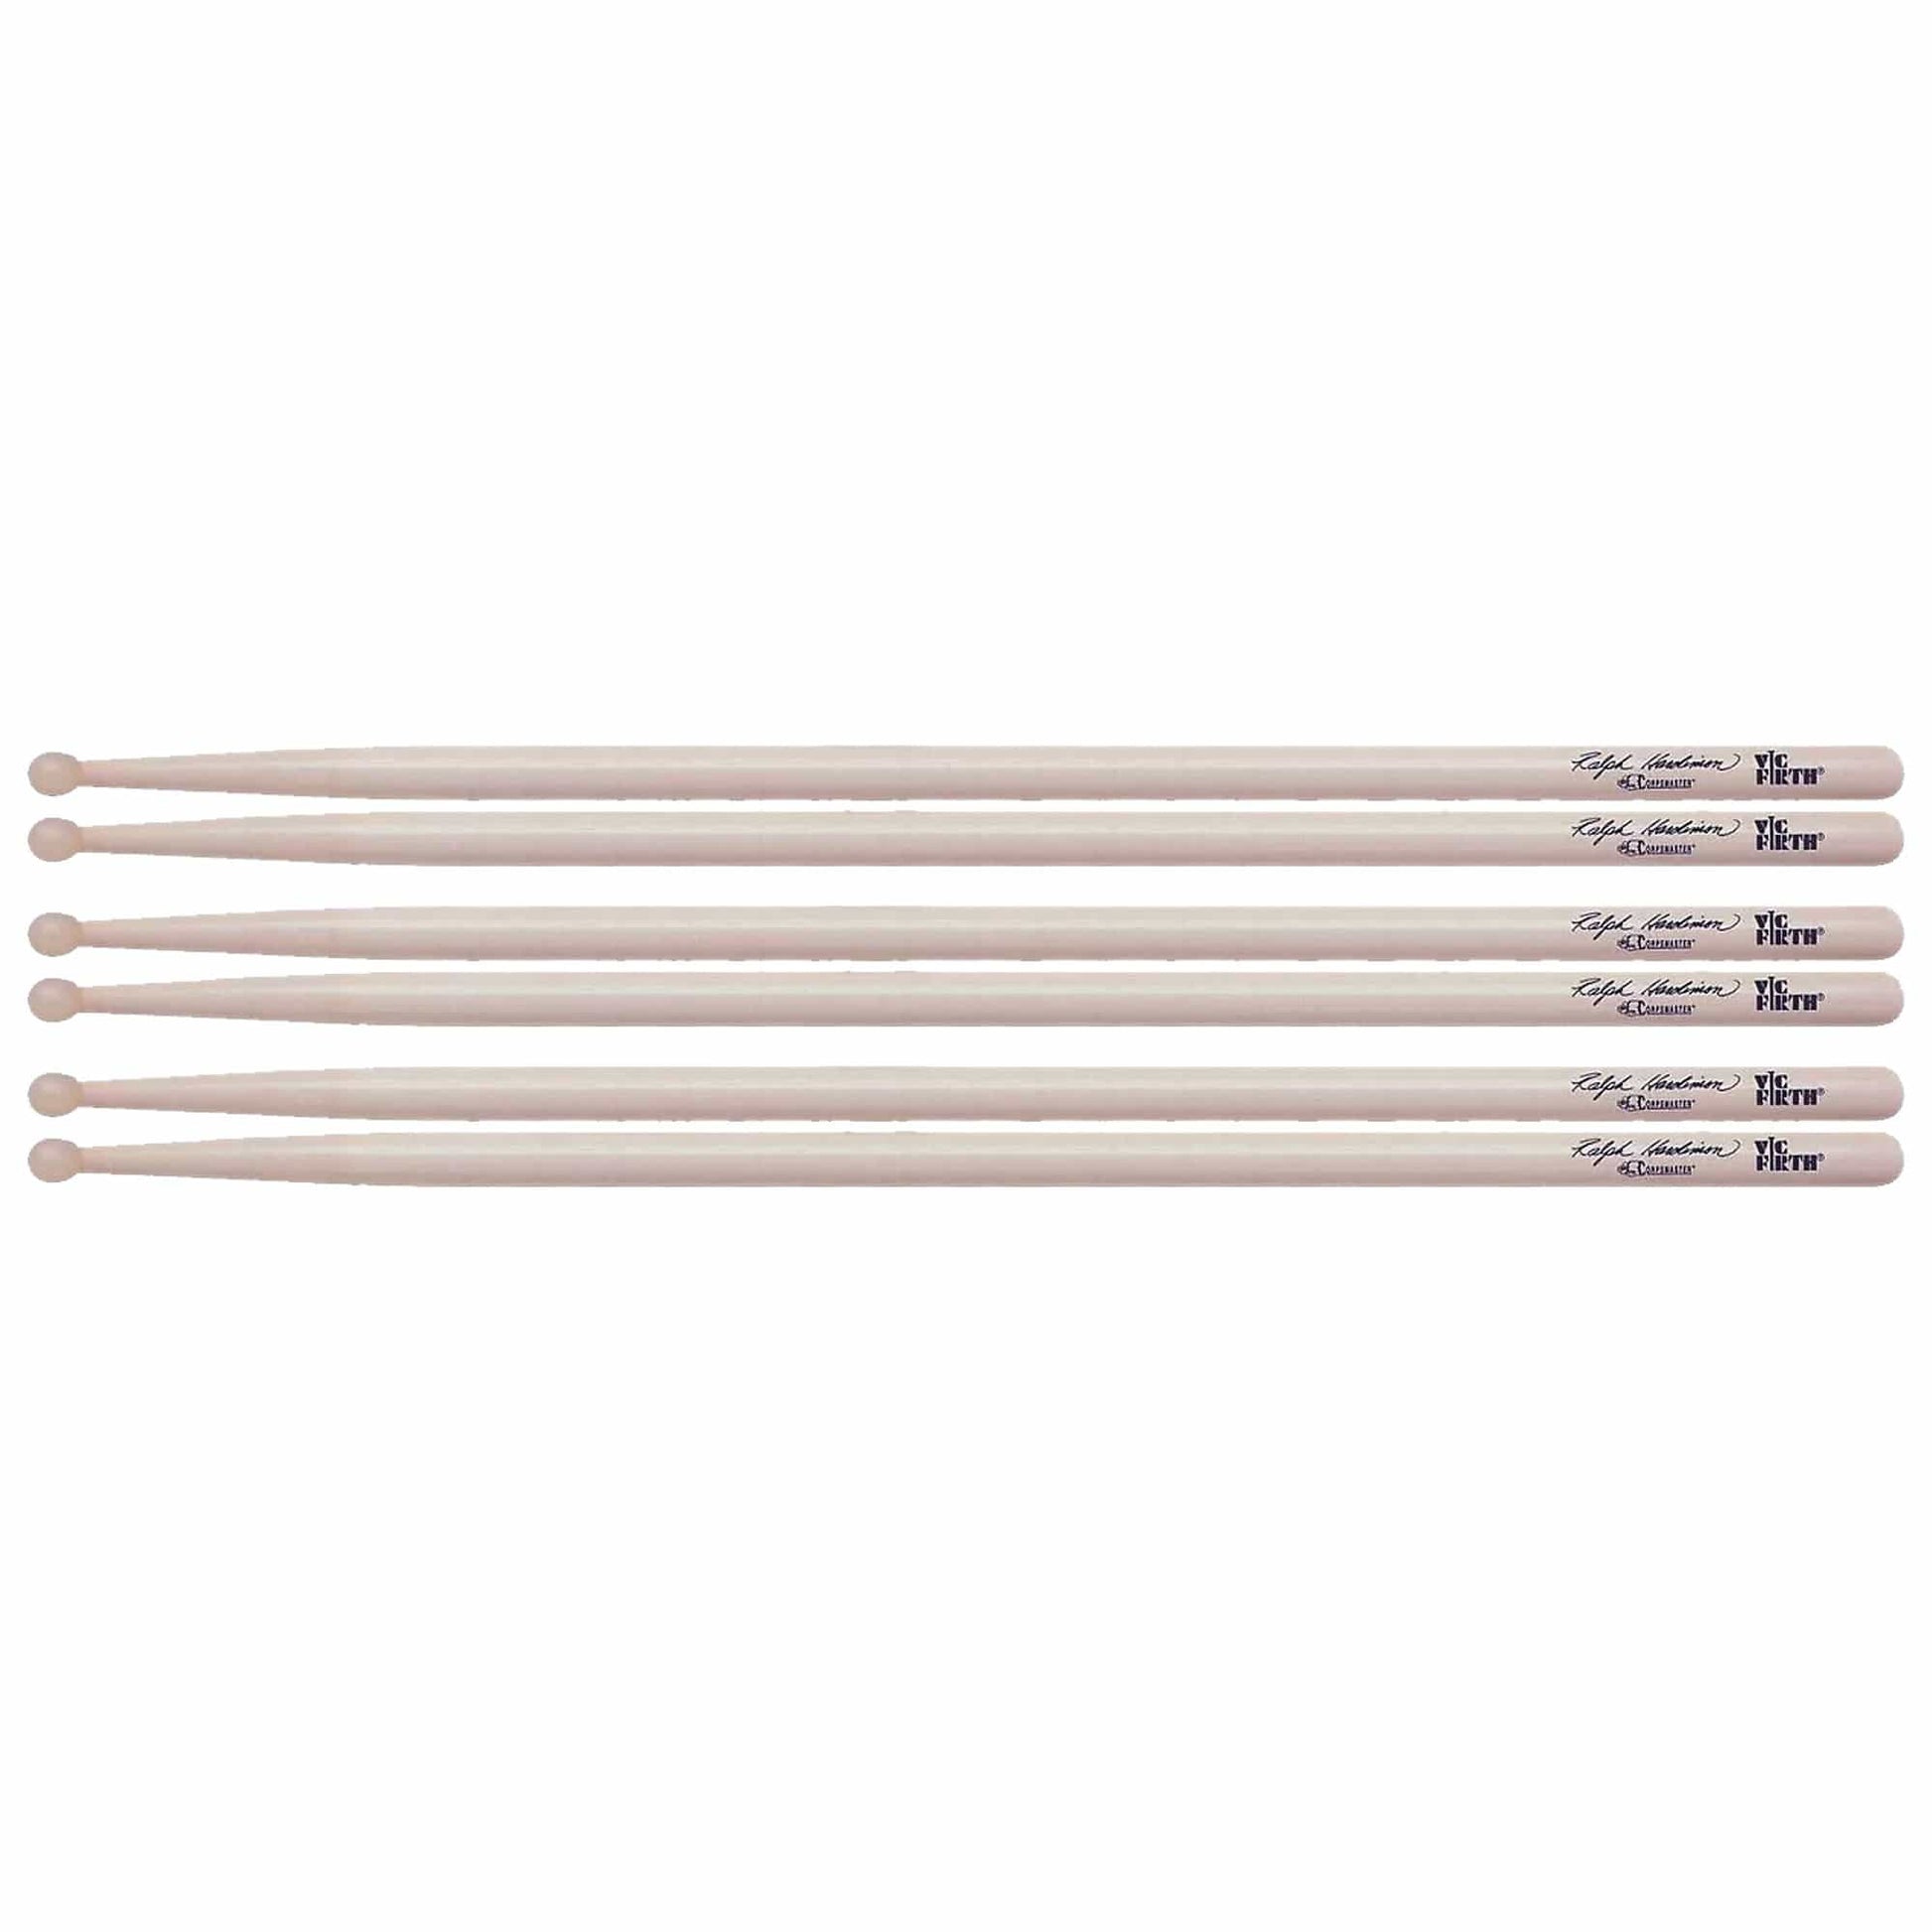 Vic Firth Ralph Hardimon Corpmaster Wood Tip Drum Sticks (3 Pair Bundle) Drums and Percussion / Parts and Accessories / Drum Sticks and Mallets